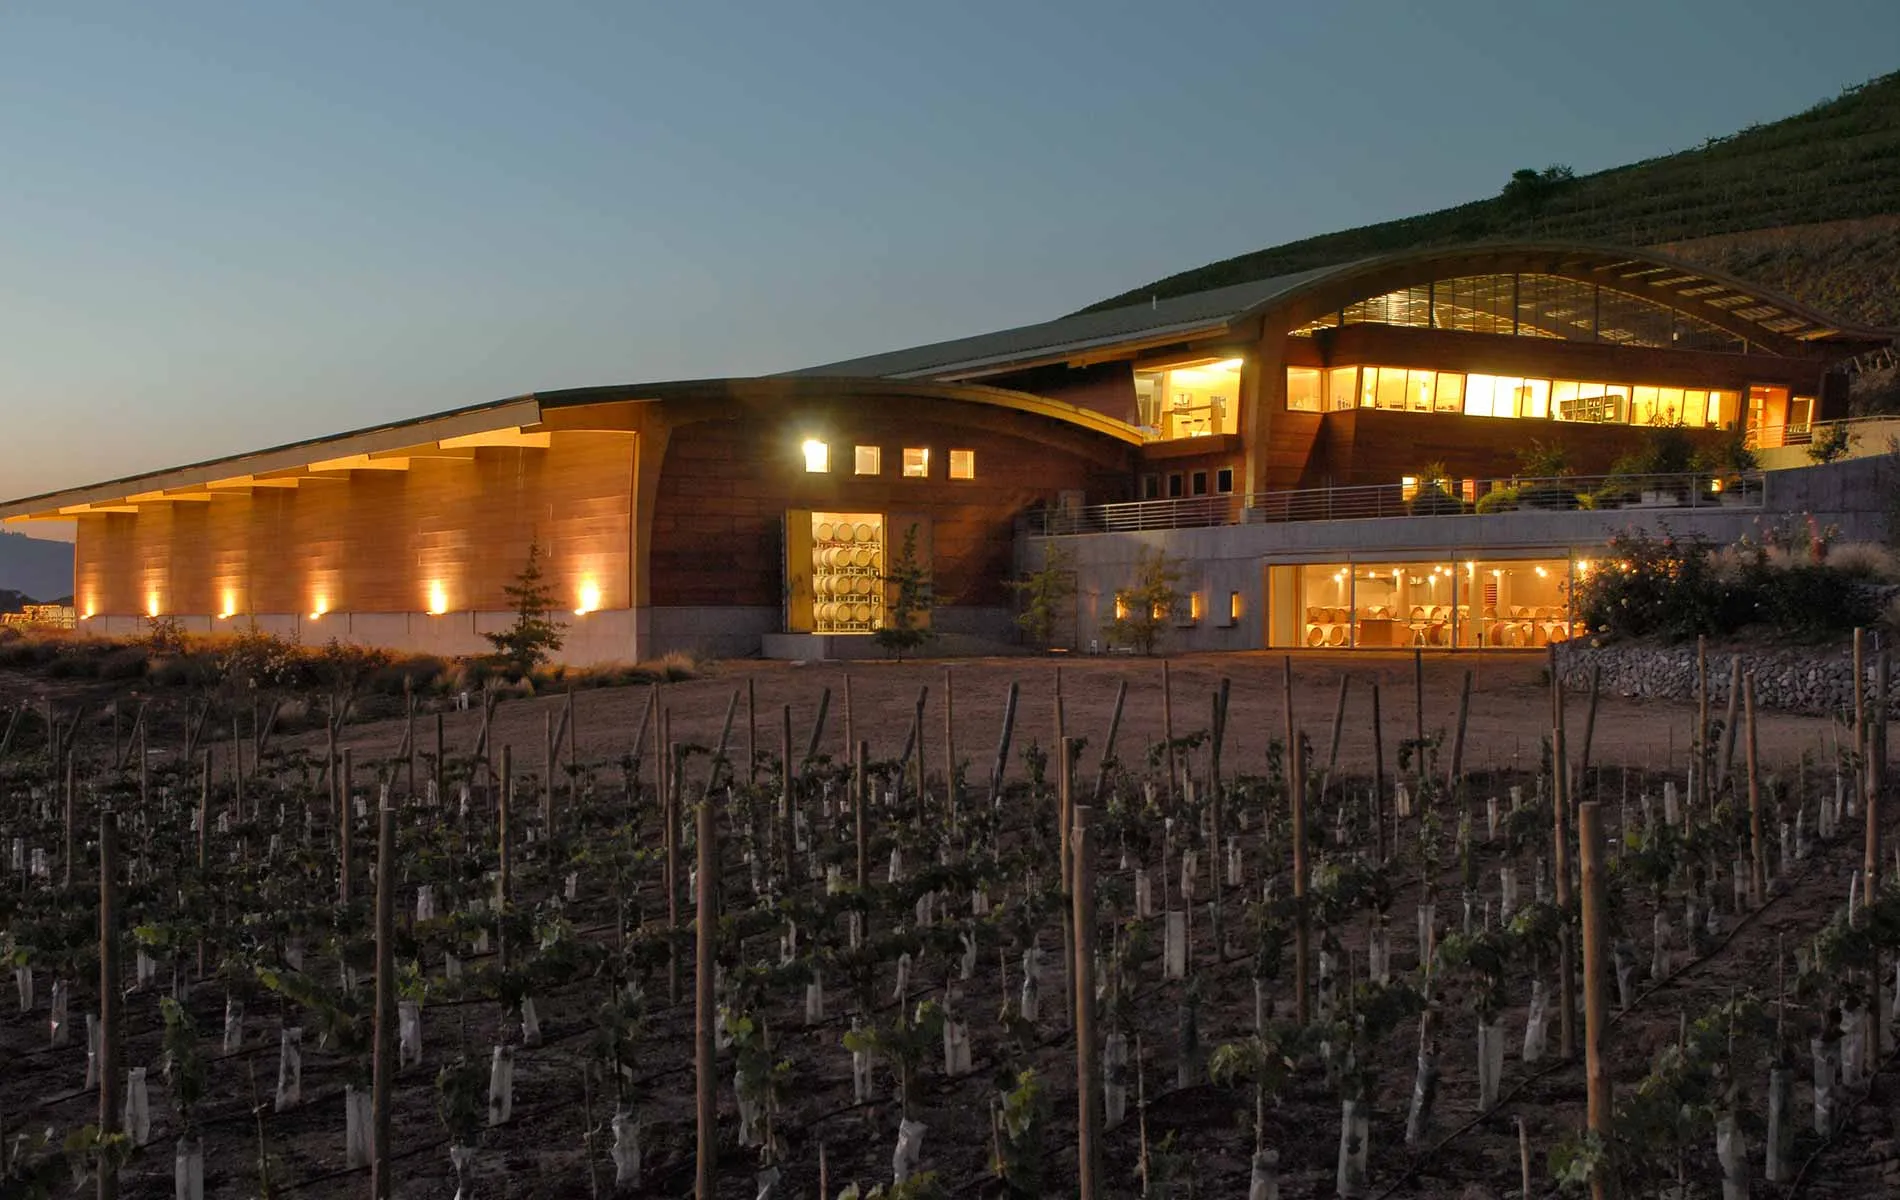 Winery Chocalan in Chile, South America | Wineries - Rated 0.8